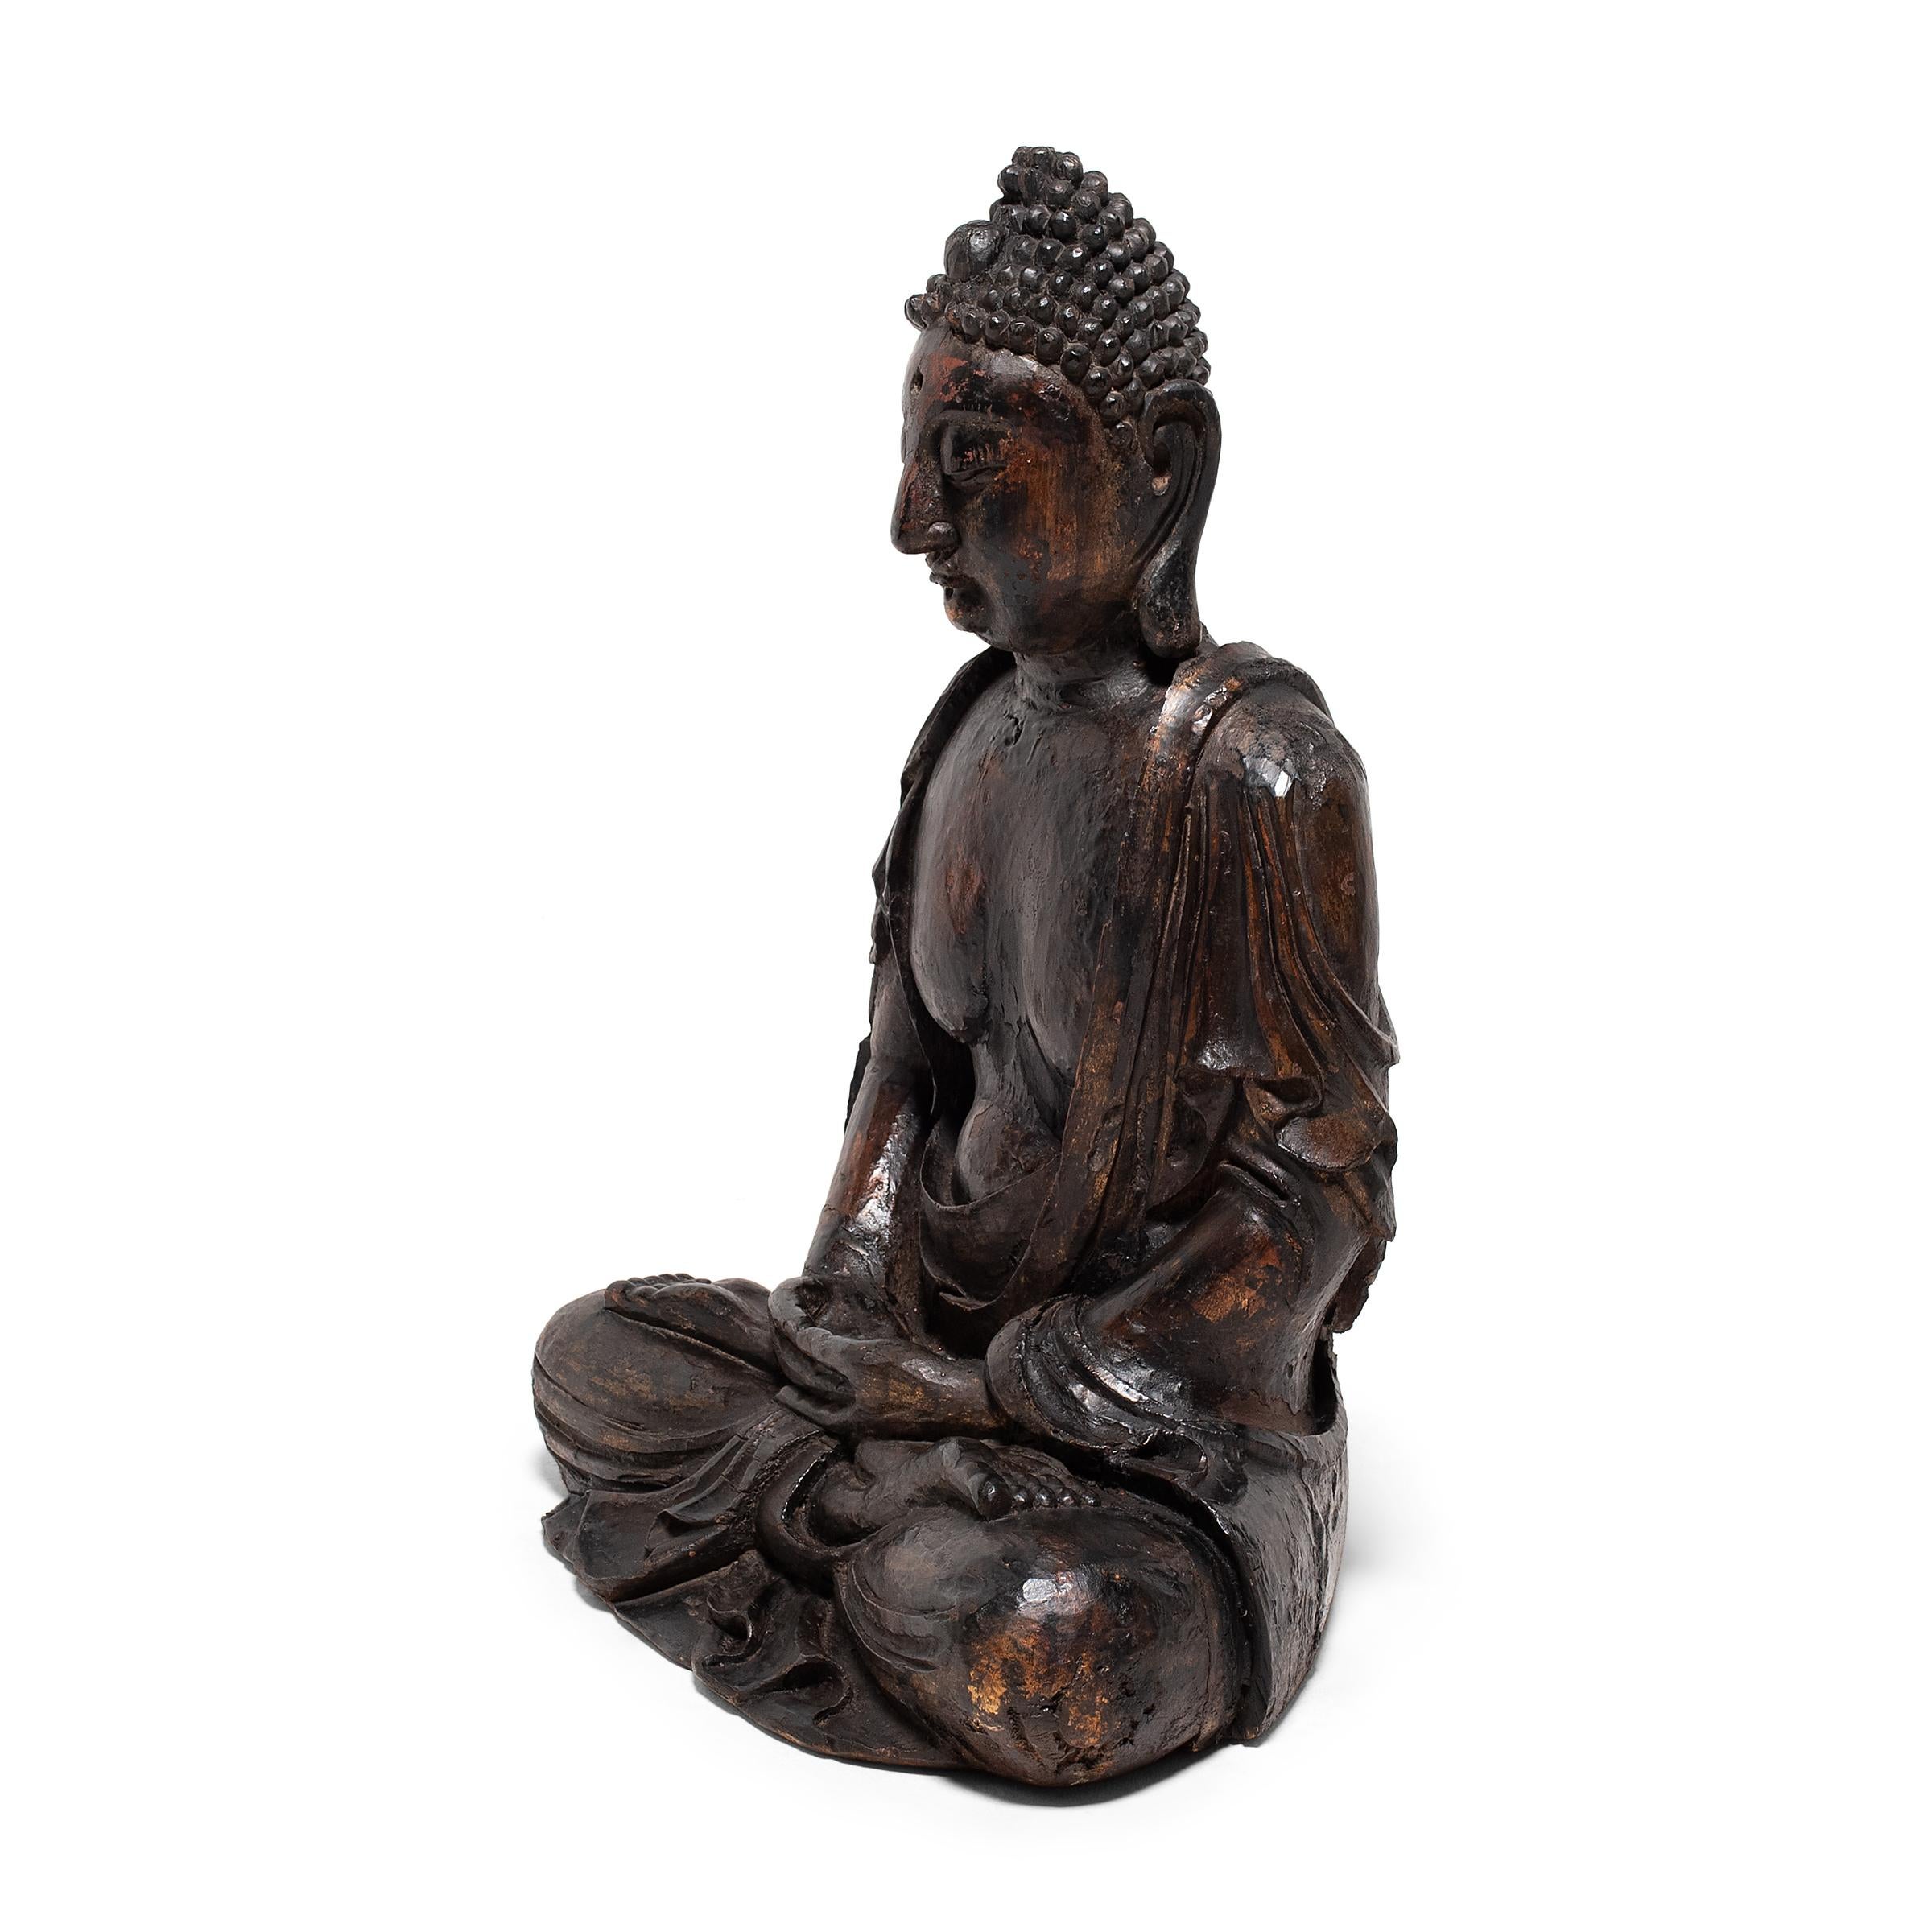 This large wooden figure depicts the Buddha Shakyamuni in perpetual meditation. Also known as Shaka or Siddhartha Gautama, the historical Buddha Shakyamuni is revered as a fully enlightened being and the source of all Buddhist teachings.